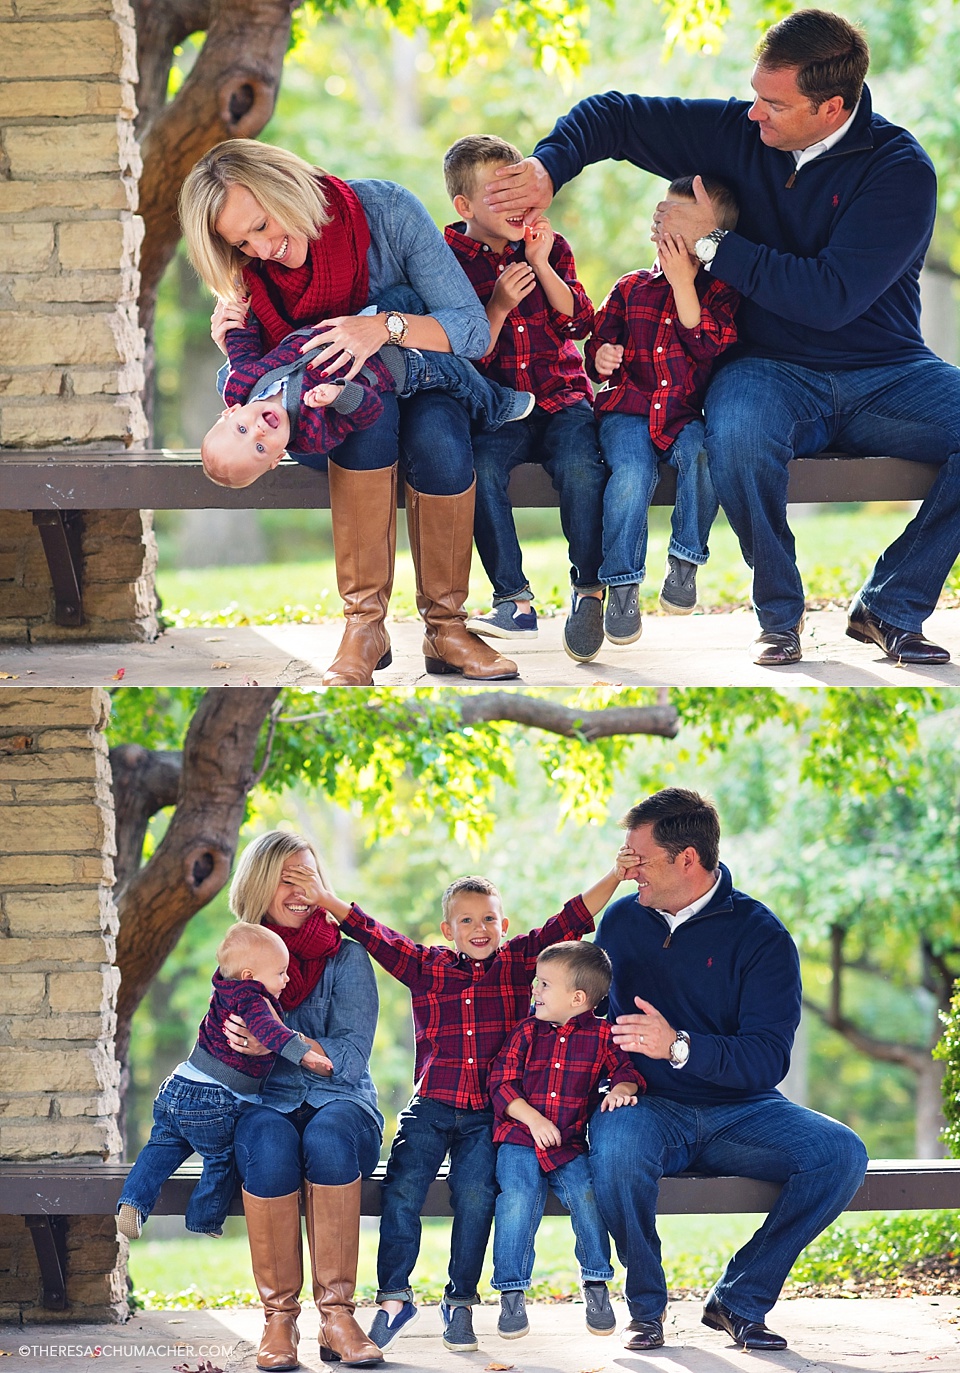 Des Moines, Fall, Rose Garden, Family Session, Theresa Schumacher Photography